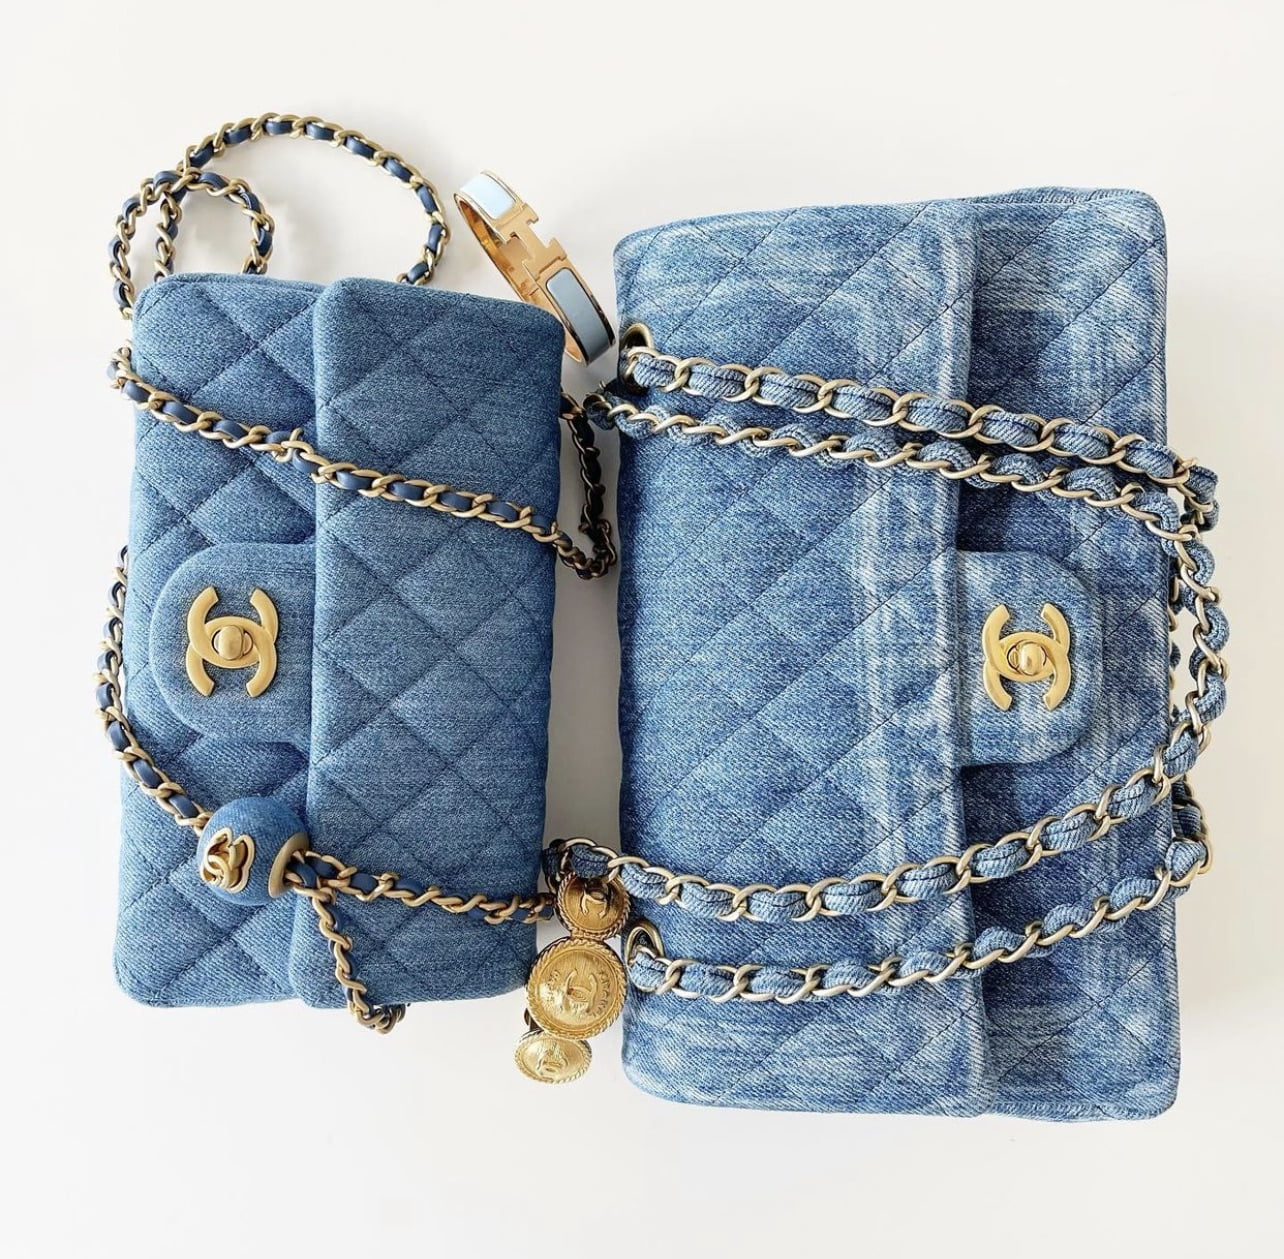 Chanel Bag: Buy Now Pay Later? Can You Stagger The Payments? - Fashion For  Lunch.